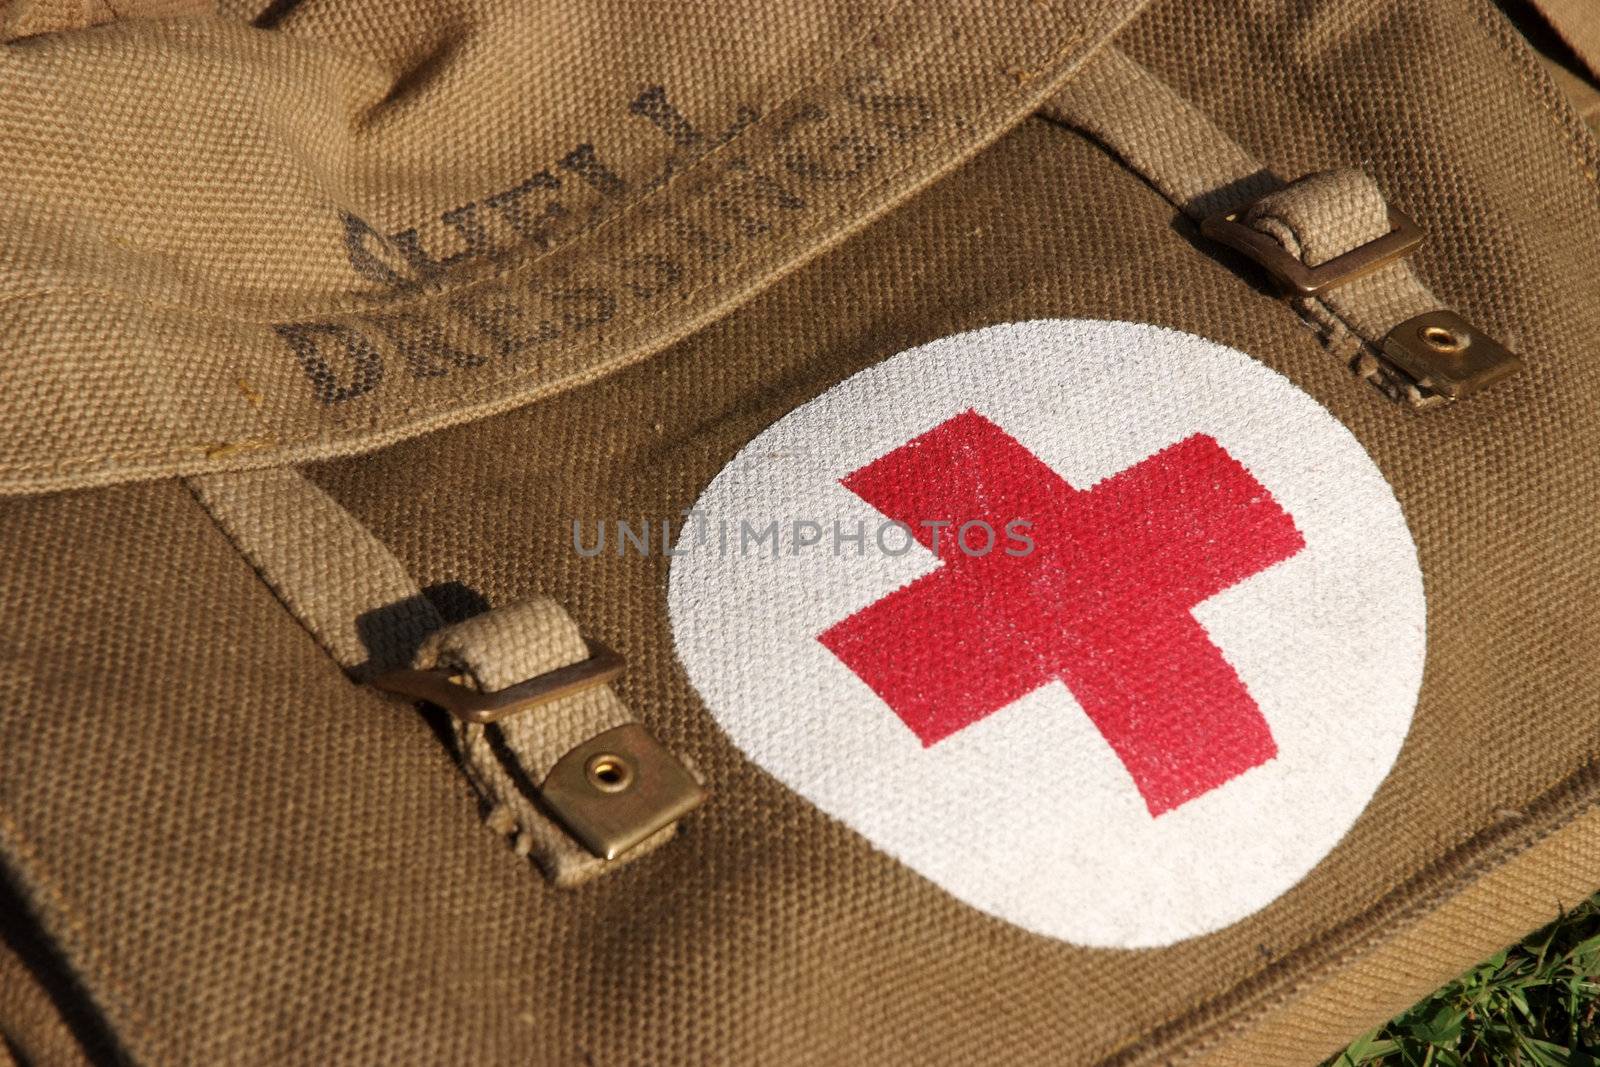 Shell dressing first aid bag and kit used during the Second World War